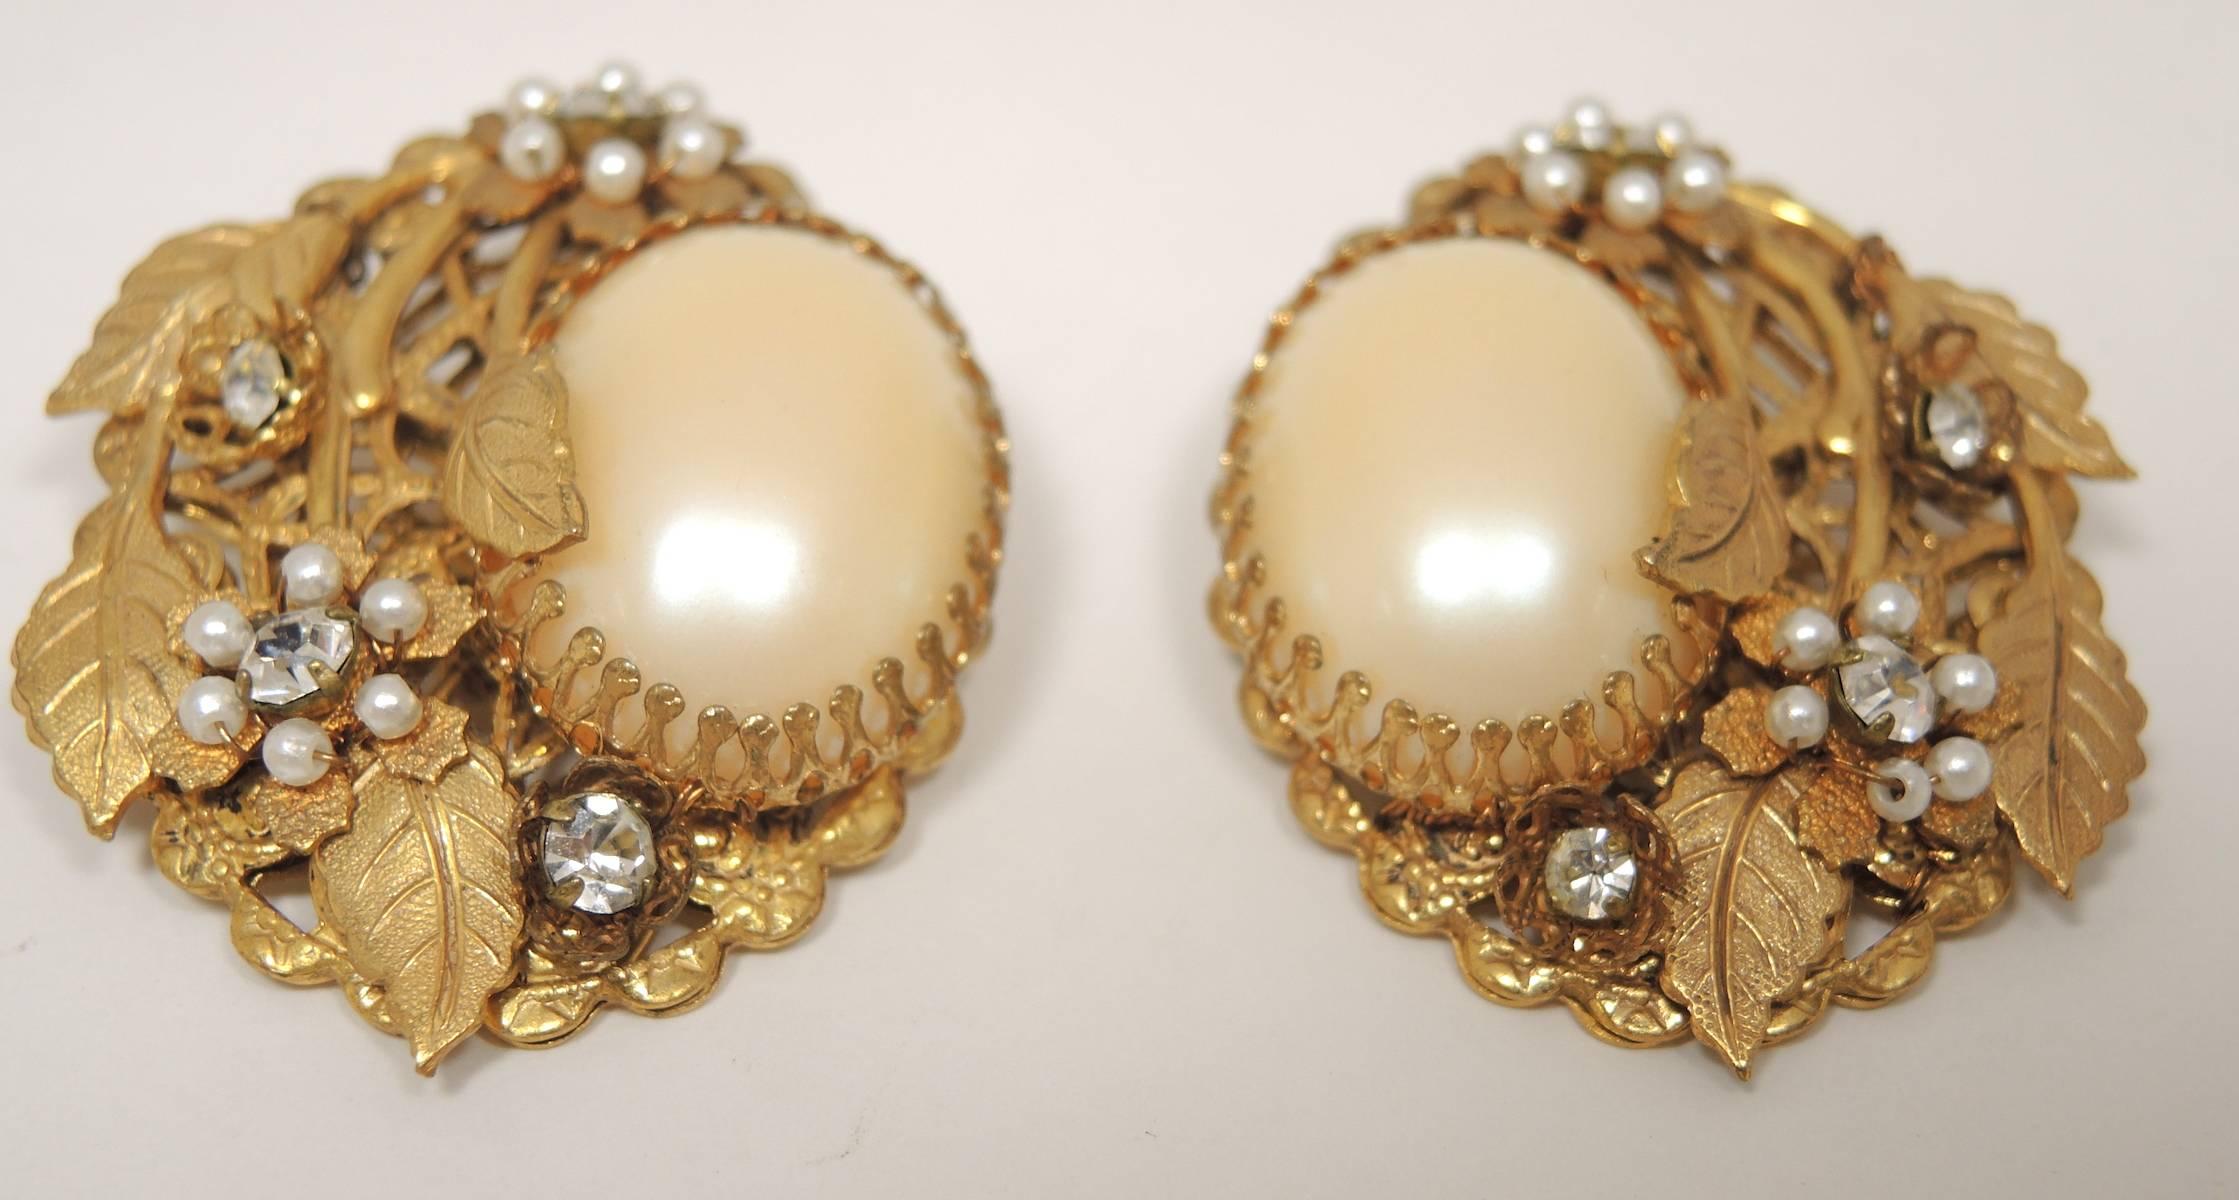 These vintage earrings resemble Miriam Haskell's design with a large faux pearl center and clear rhinestone accents in a heavily etched floral style gold-tone setting. There earrings measure 1-3/8” x 1-1/4” and are in excellent condition.